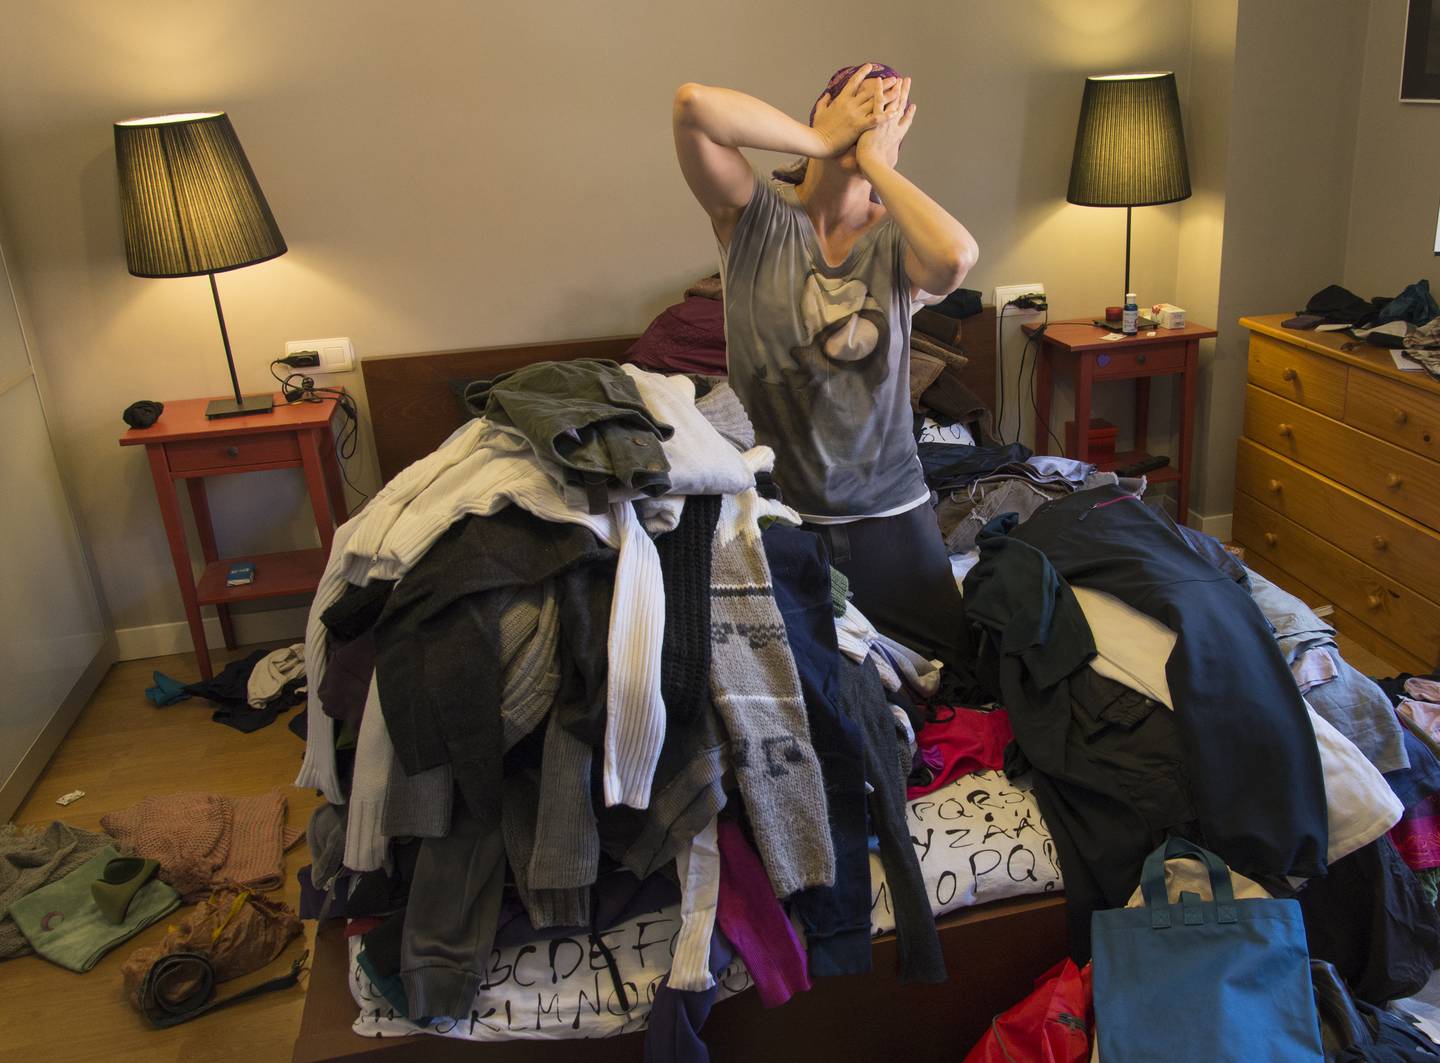 Wide angle view of young woman with hands covering face kneeling on bed among large tiles of clothes and other objects in a chaotic bedroom. León, Castilla y León, Spain. Getty Images